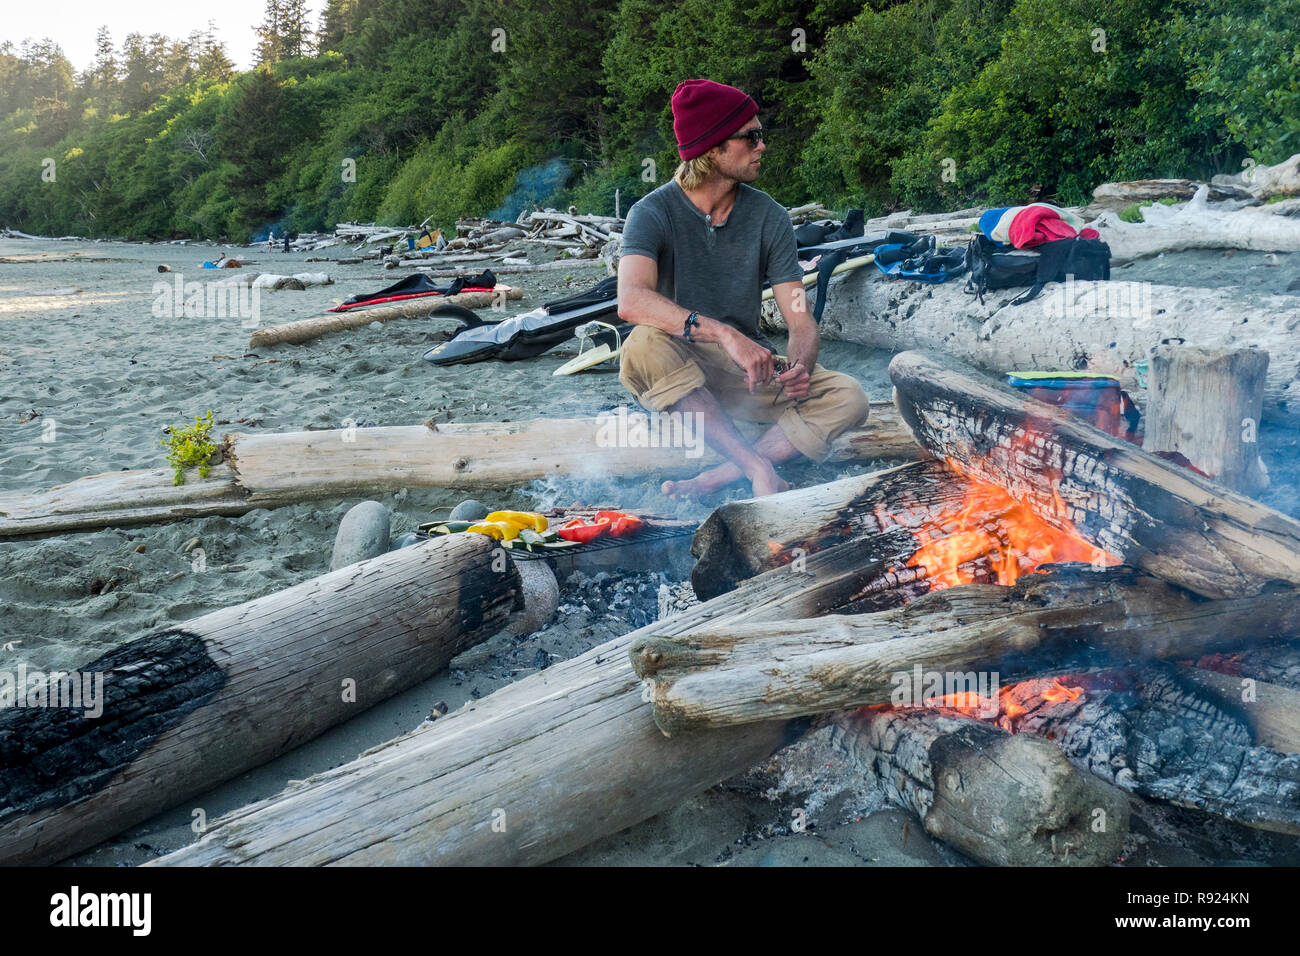 A man sits by a fire and waits to enjoy a barbeque after a surfing session at Florencia Bay in Tofion, British Columbia, Canada Stock Photo